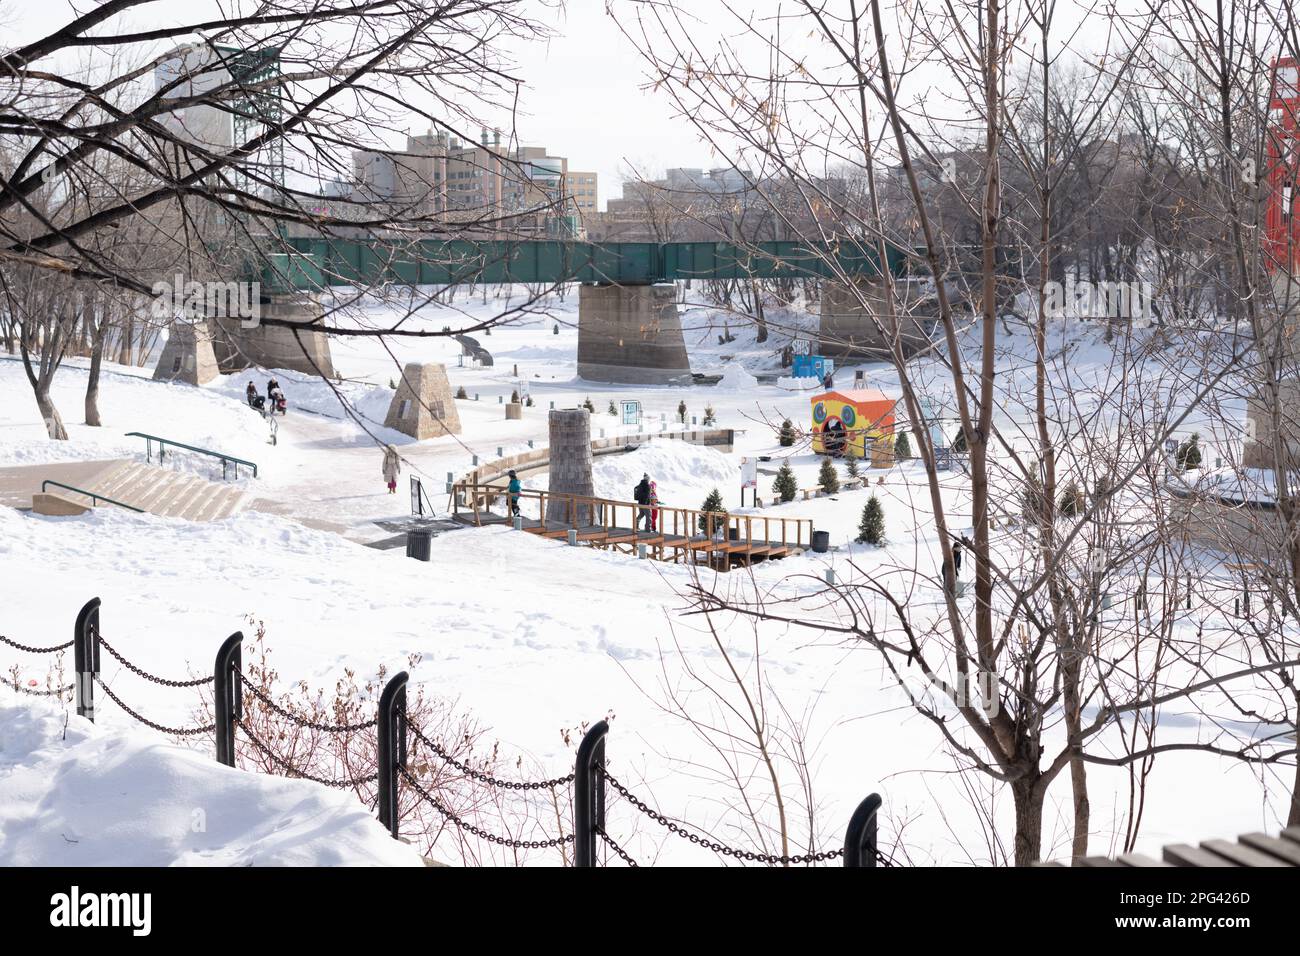 People enjoying the outdoors in winter at the  Arctic Glacier Winter Park at The Forks on the Assiniboine River in Winnipeg, Manitoba, Canada. Stock Photo